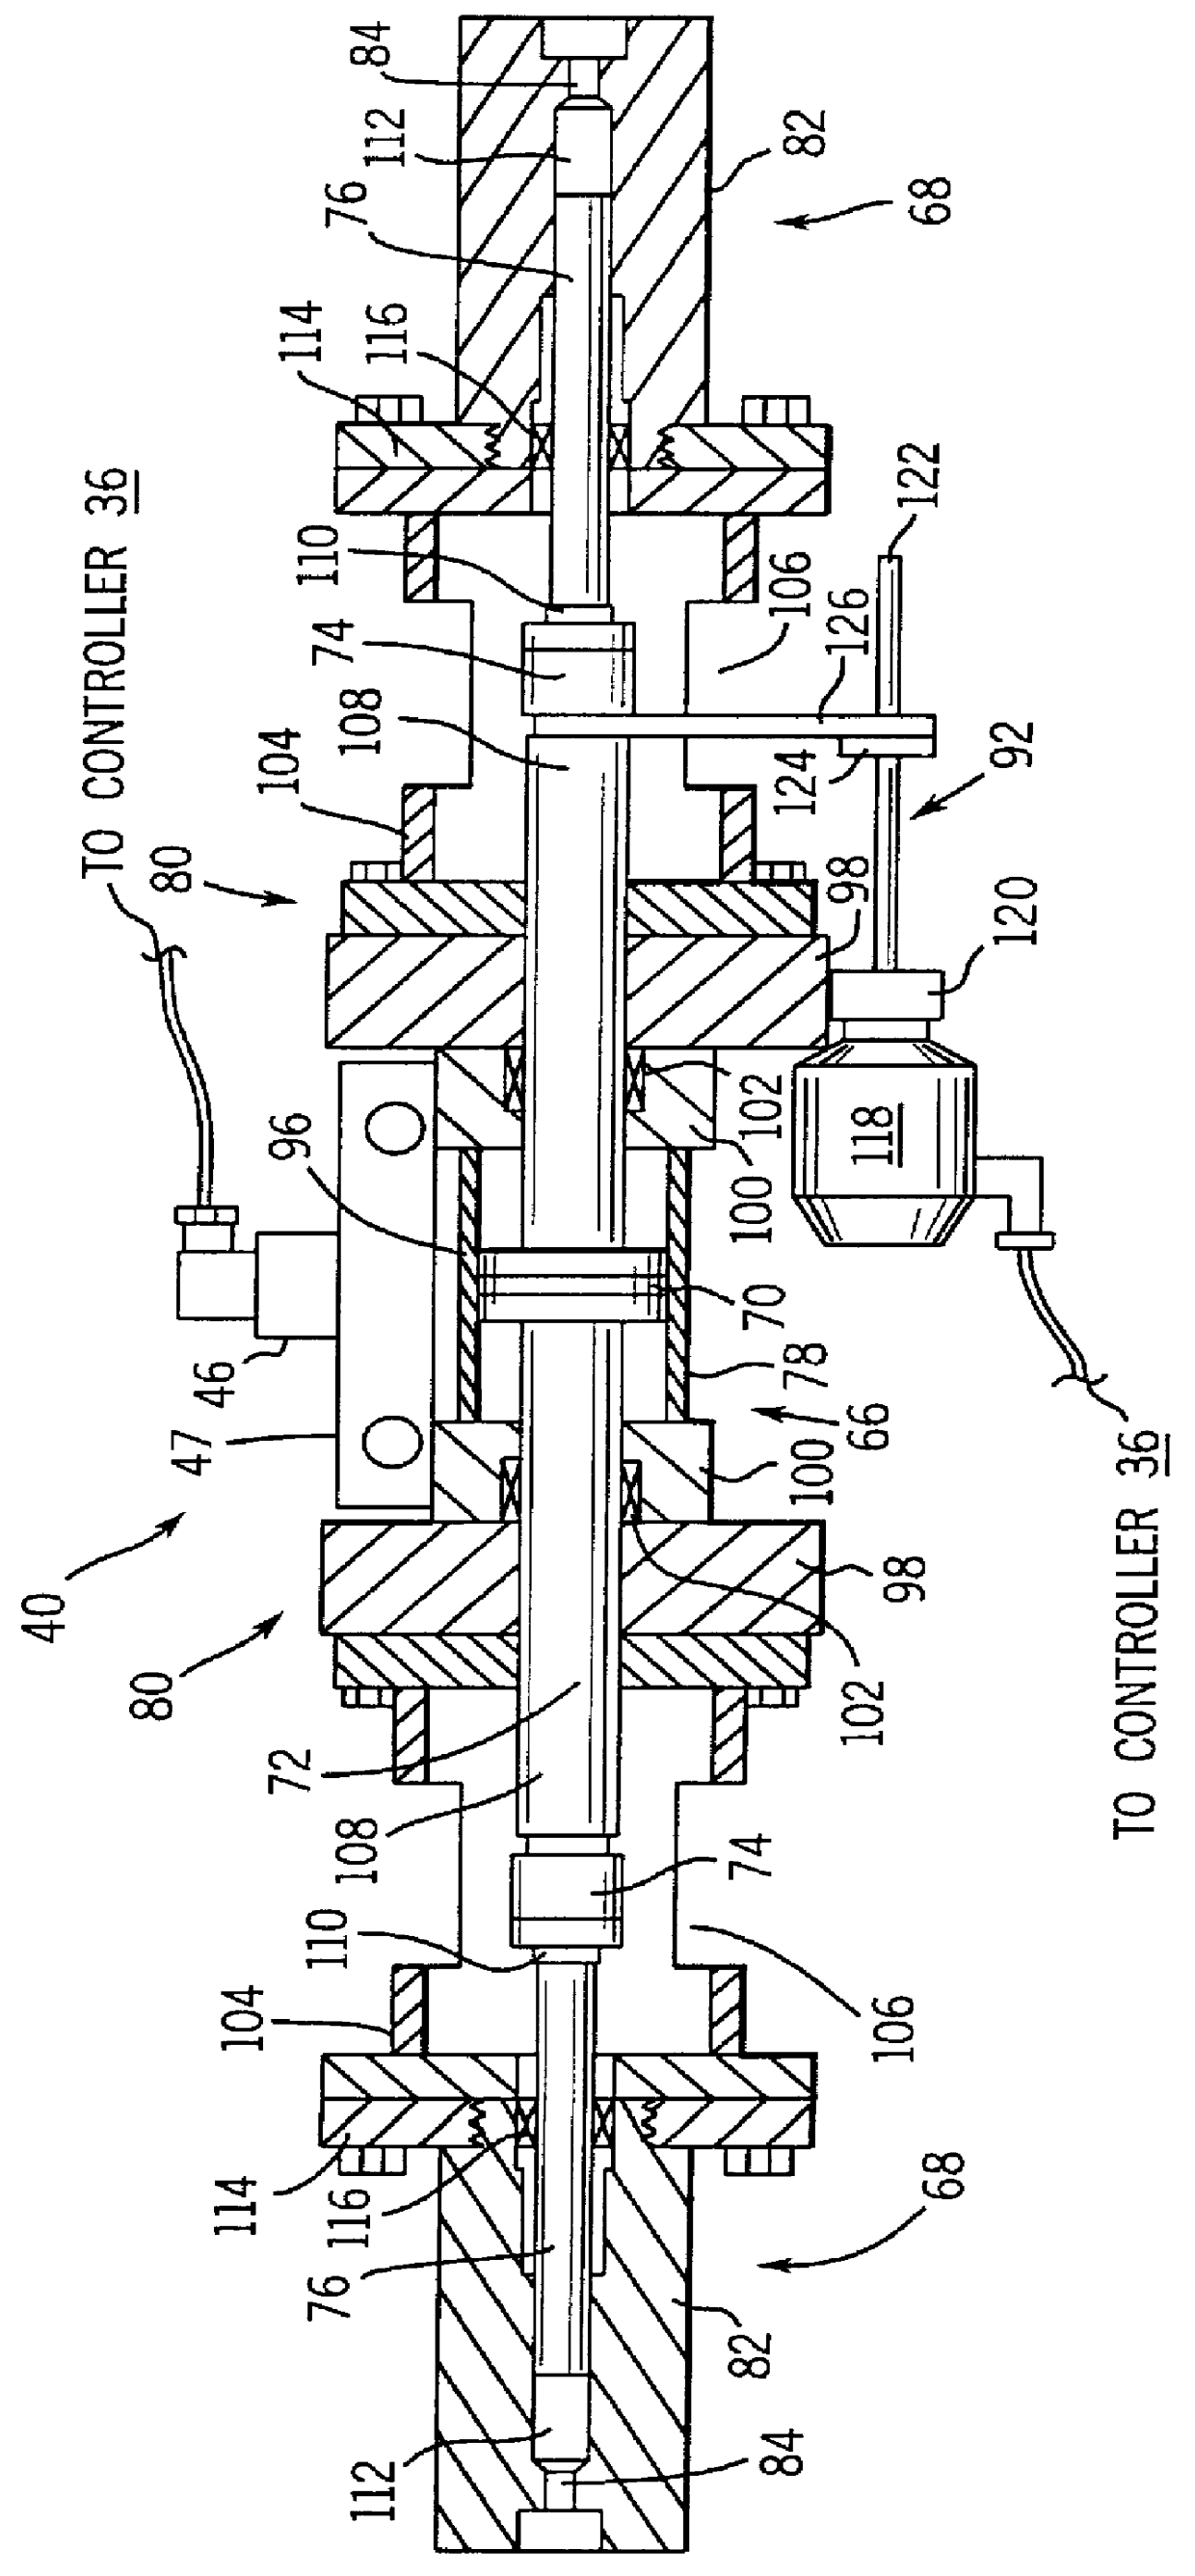 Method and apparatus for metering injection pump flow